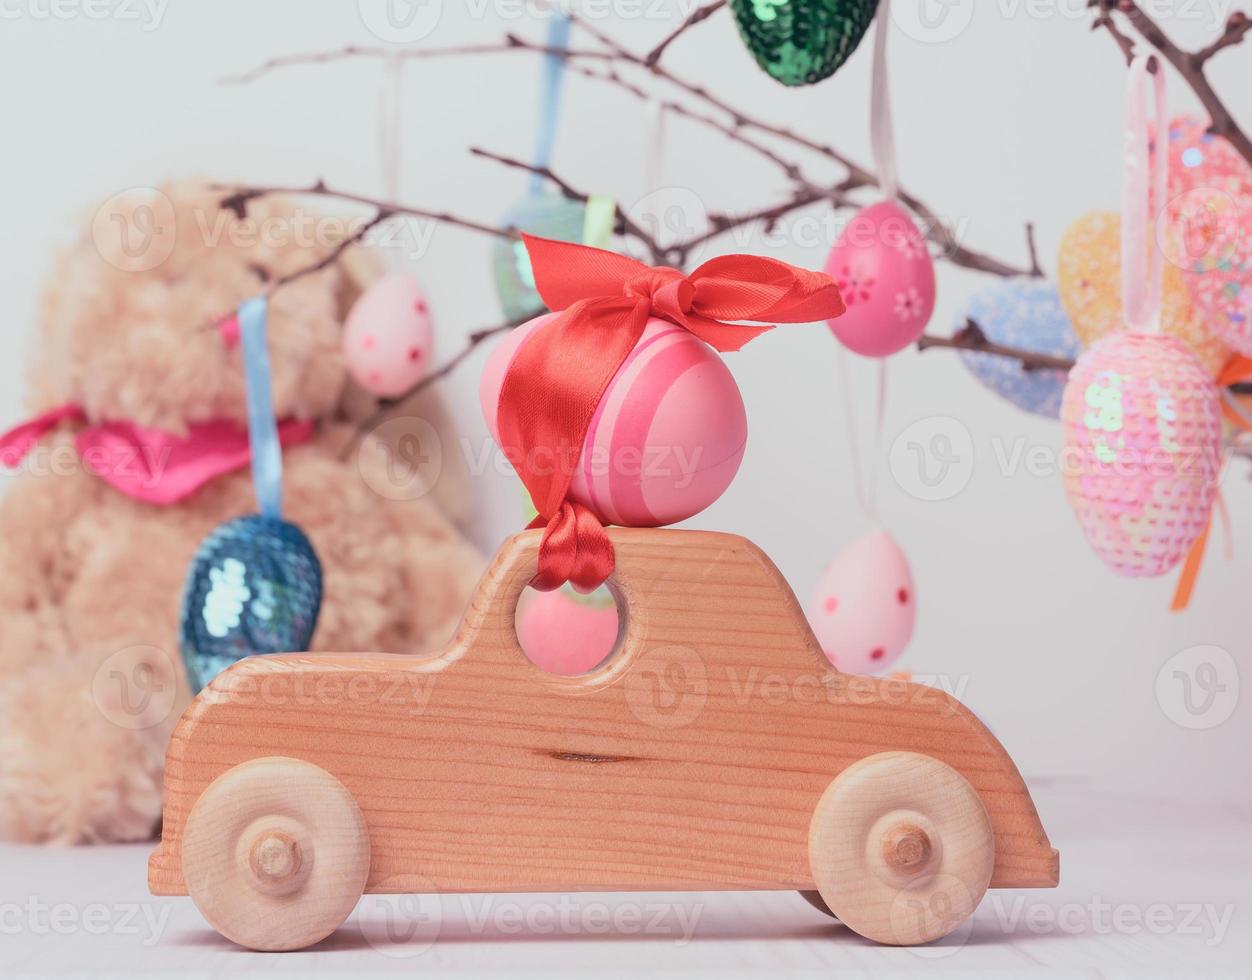 wooden toy car carrying a pink Easter egg fixed with a red ribbon photo